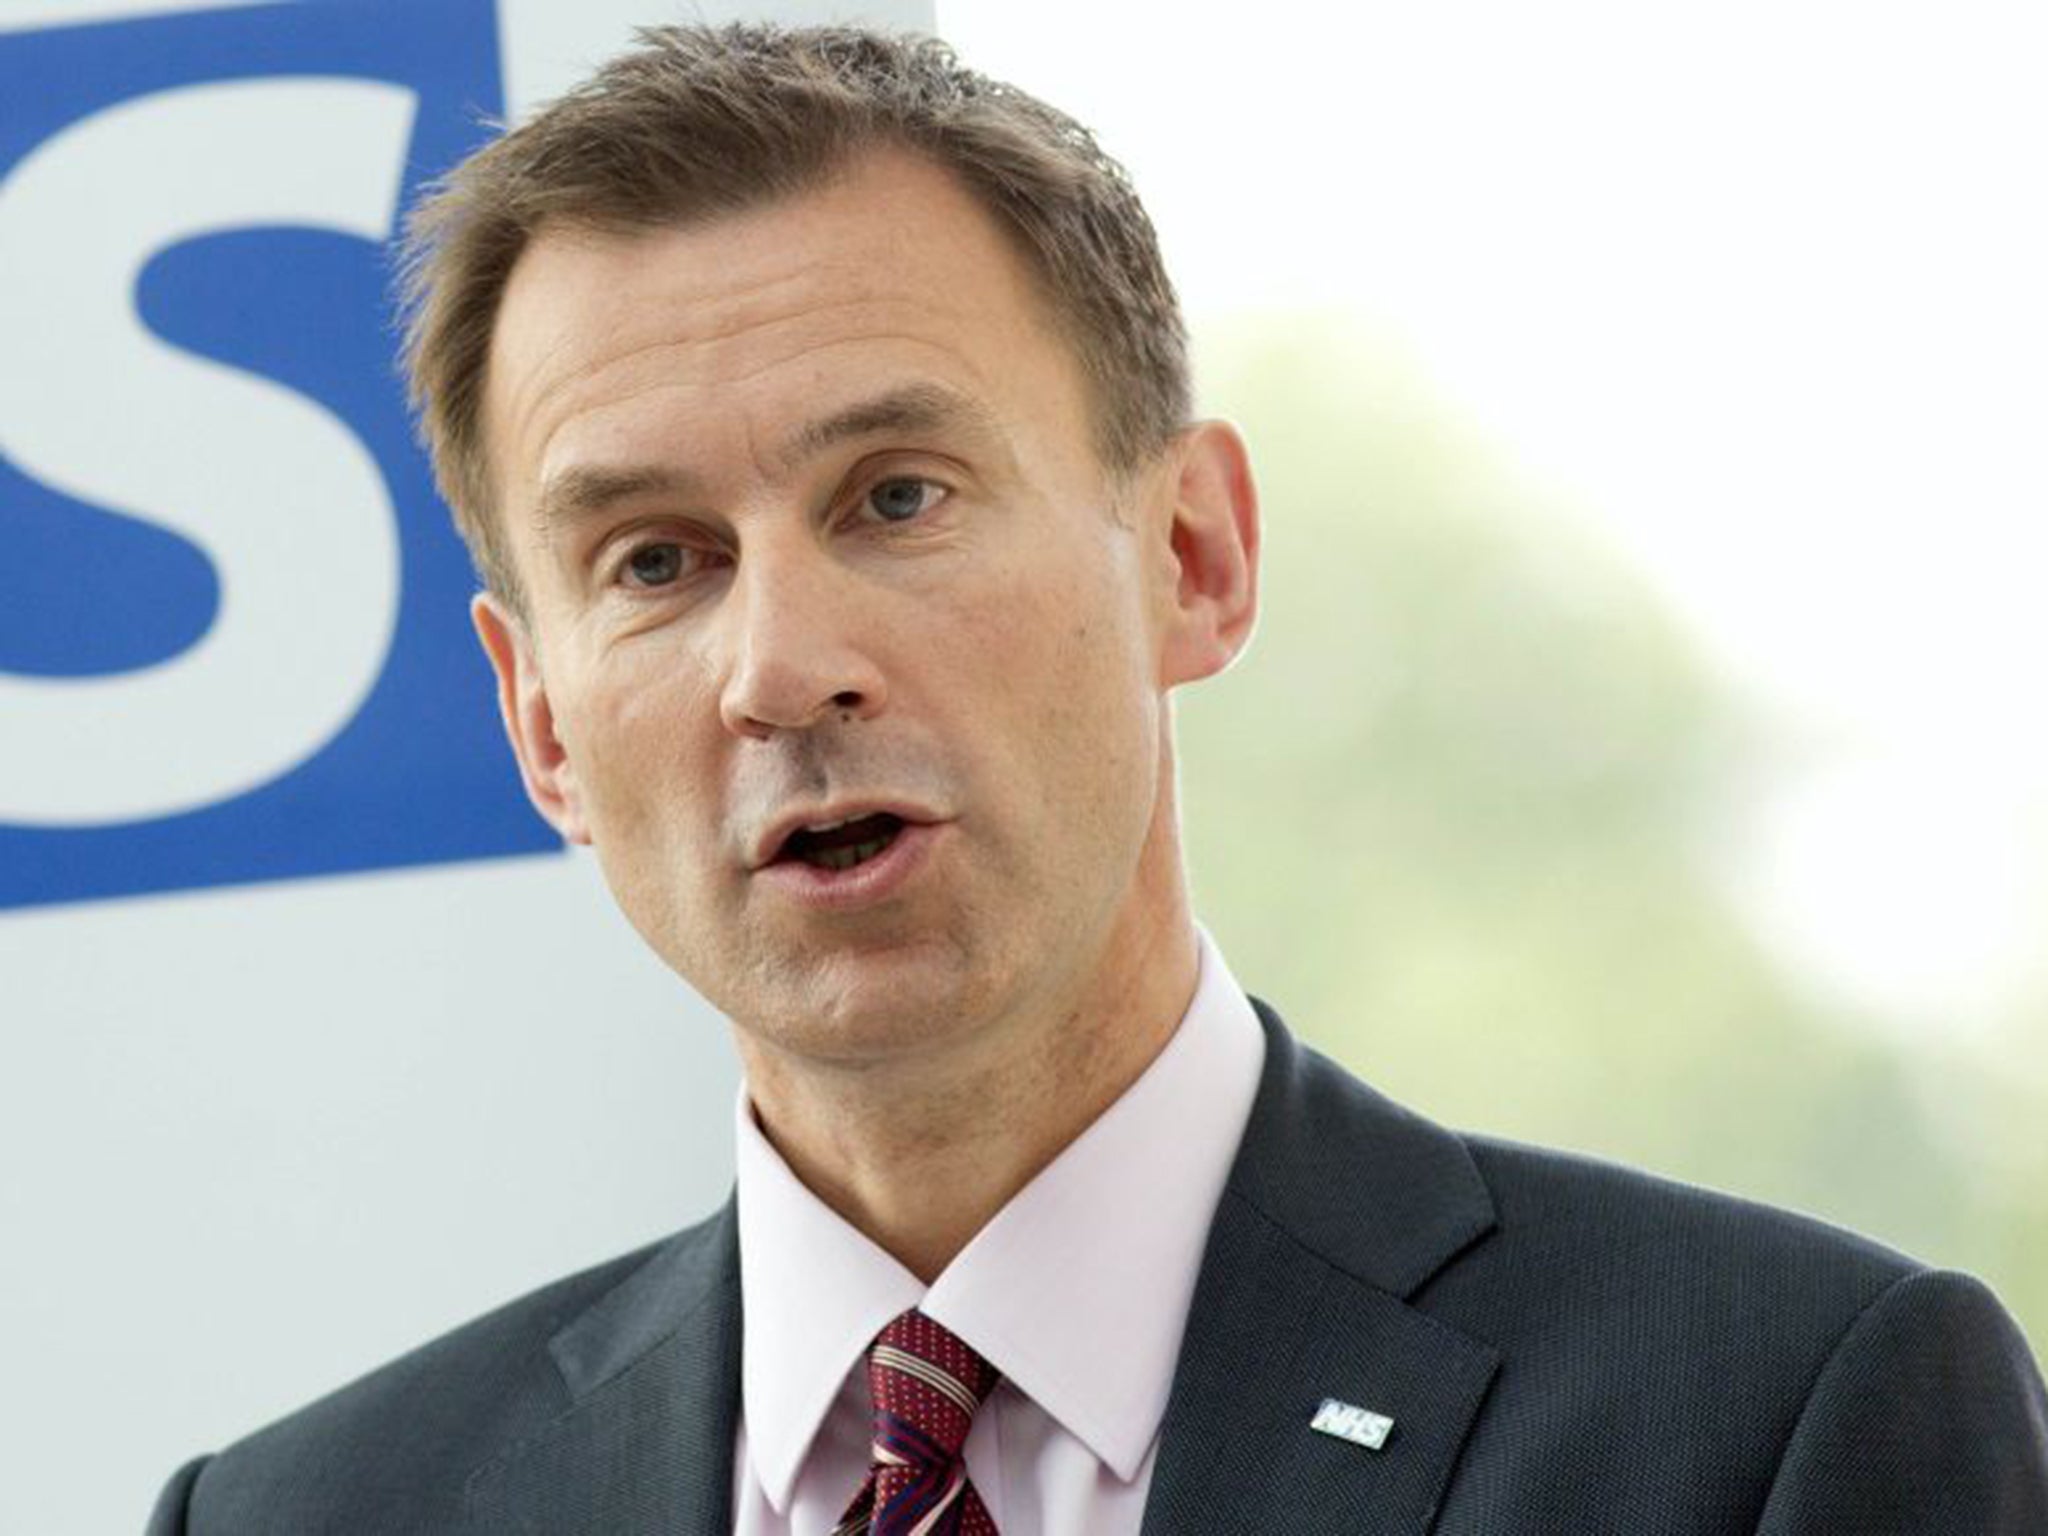 Jeremy Hunt sneaked out an announcement that NHS England was discontinuing weekly updates of a number of target indicators